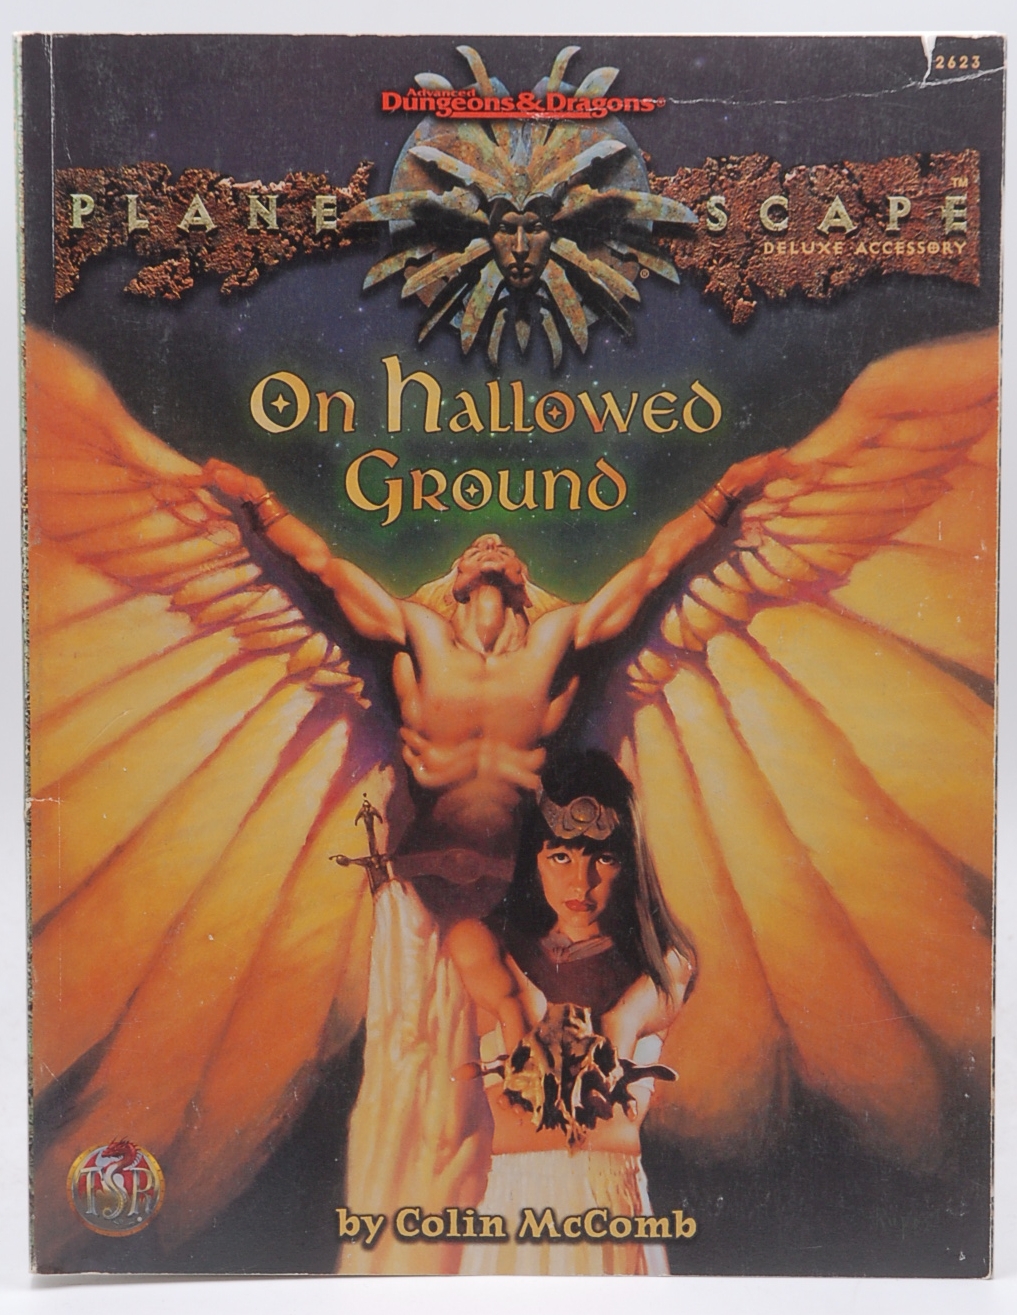 On Hallowed Ground (Advanced Dungeons & Dragons: Planescape, Deluxe Campaign Accessory/2623) - Colin McComb